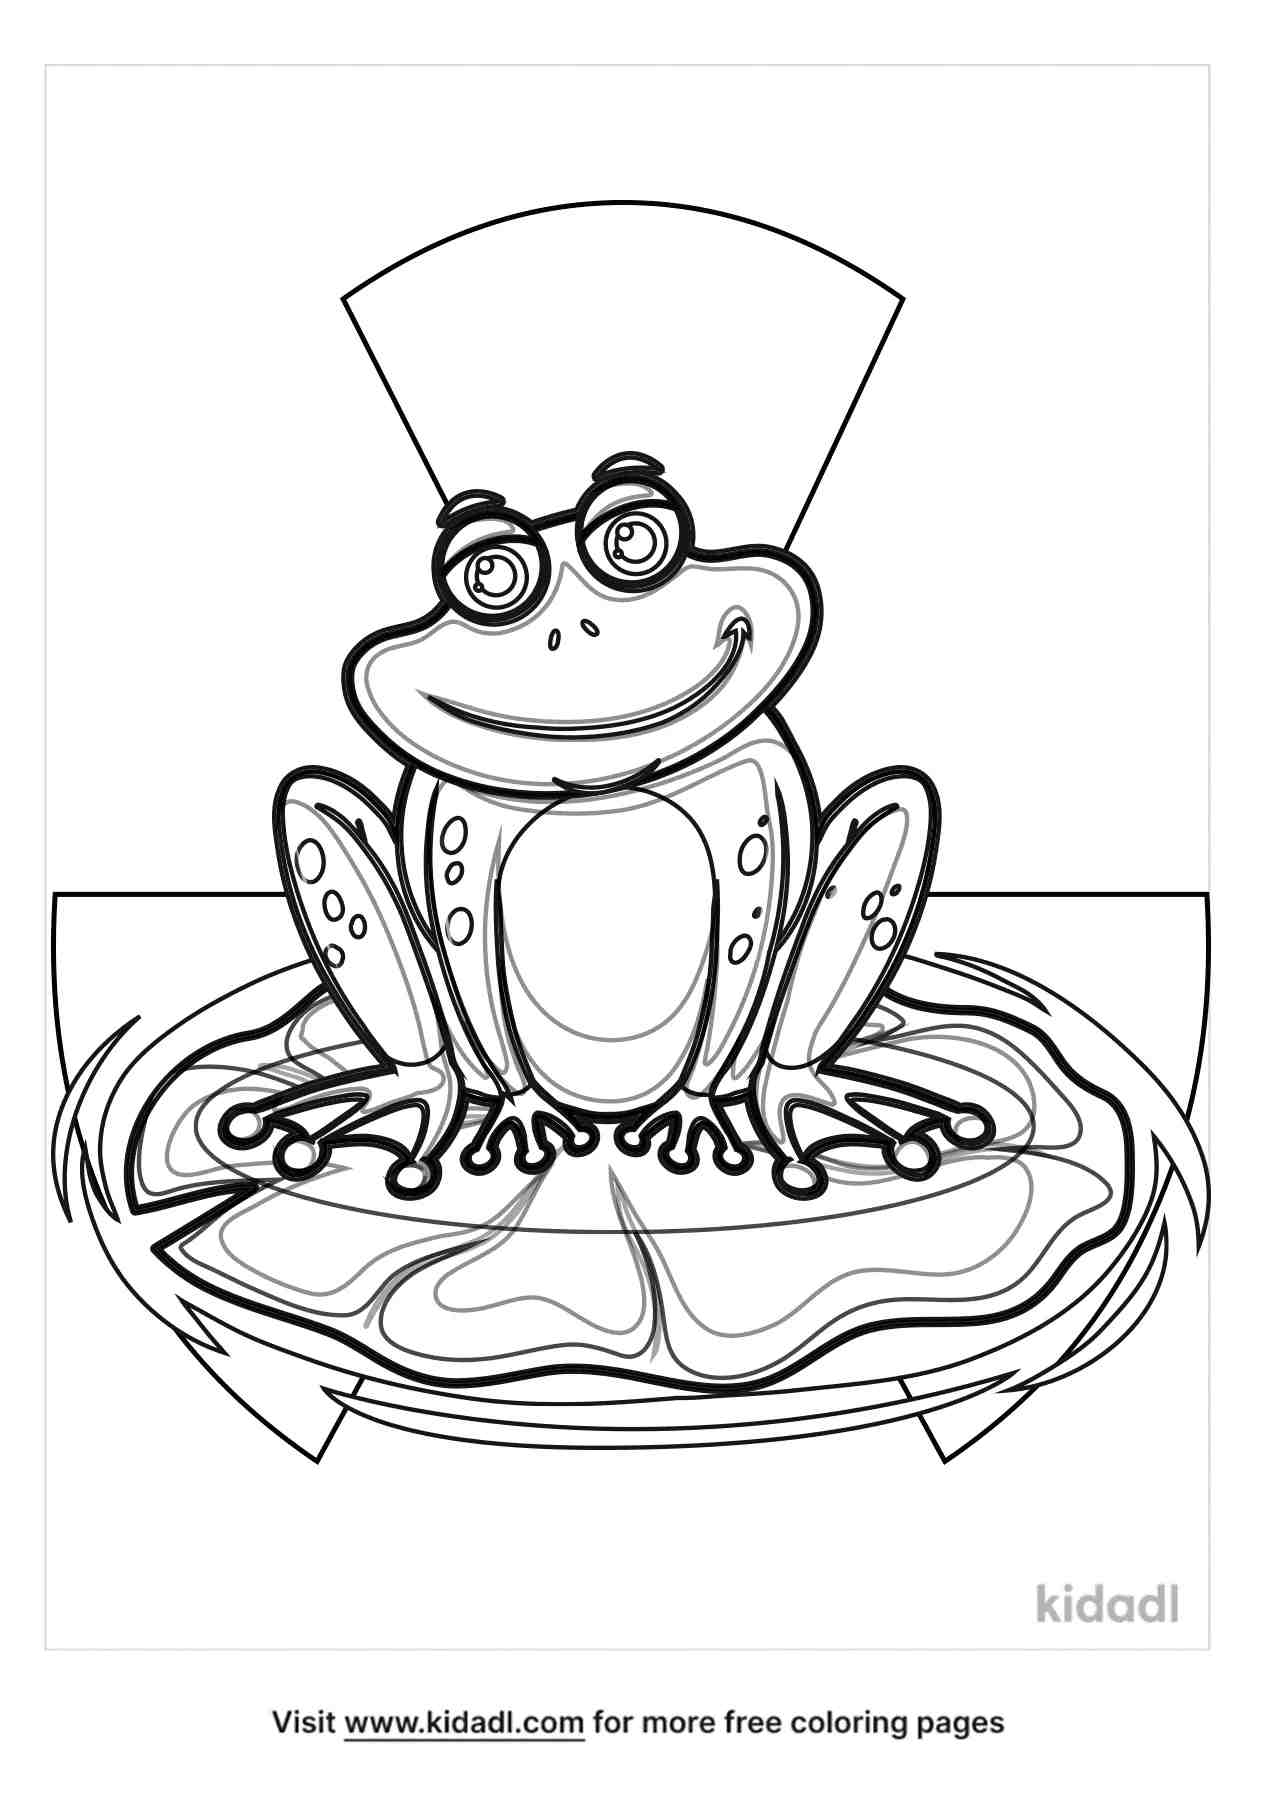 Enjoy this poison dart frog coloring page.